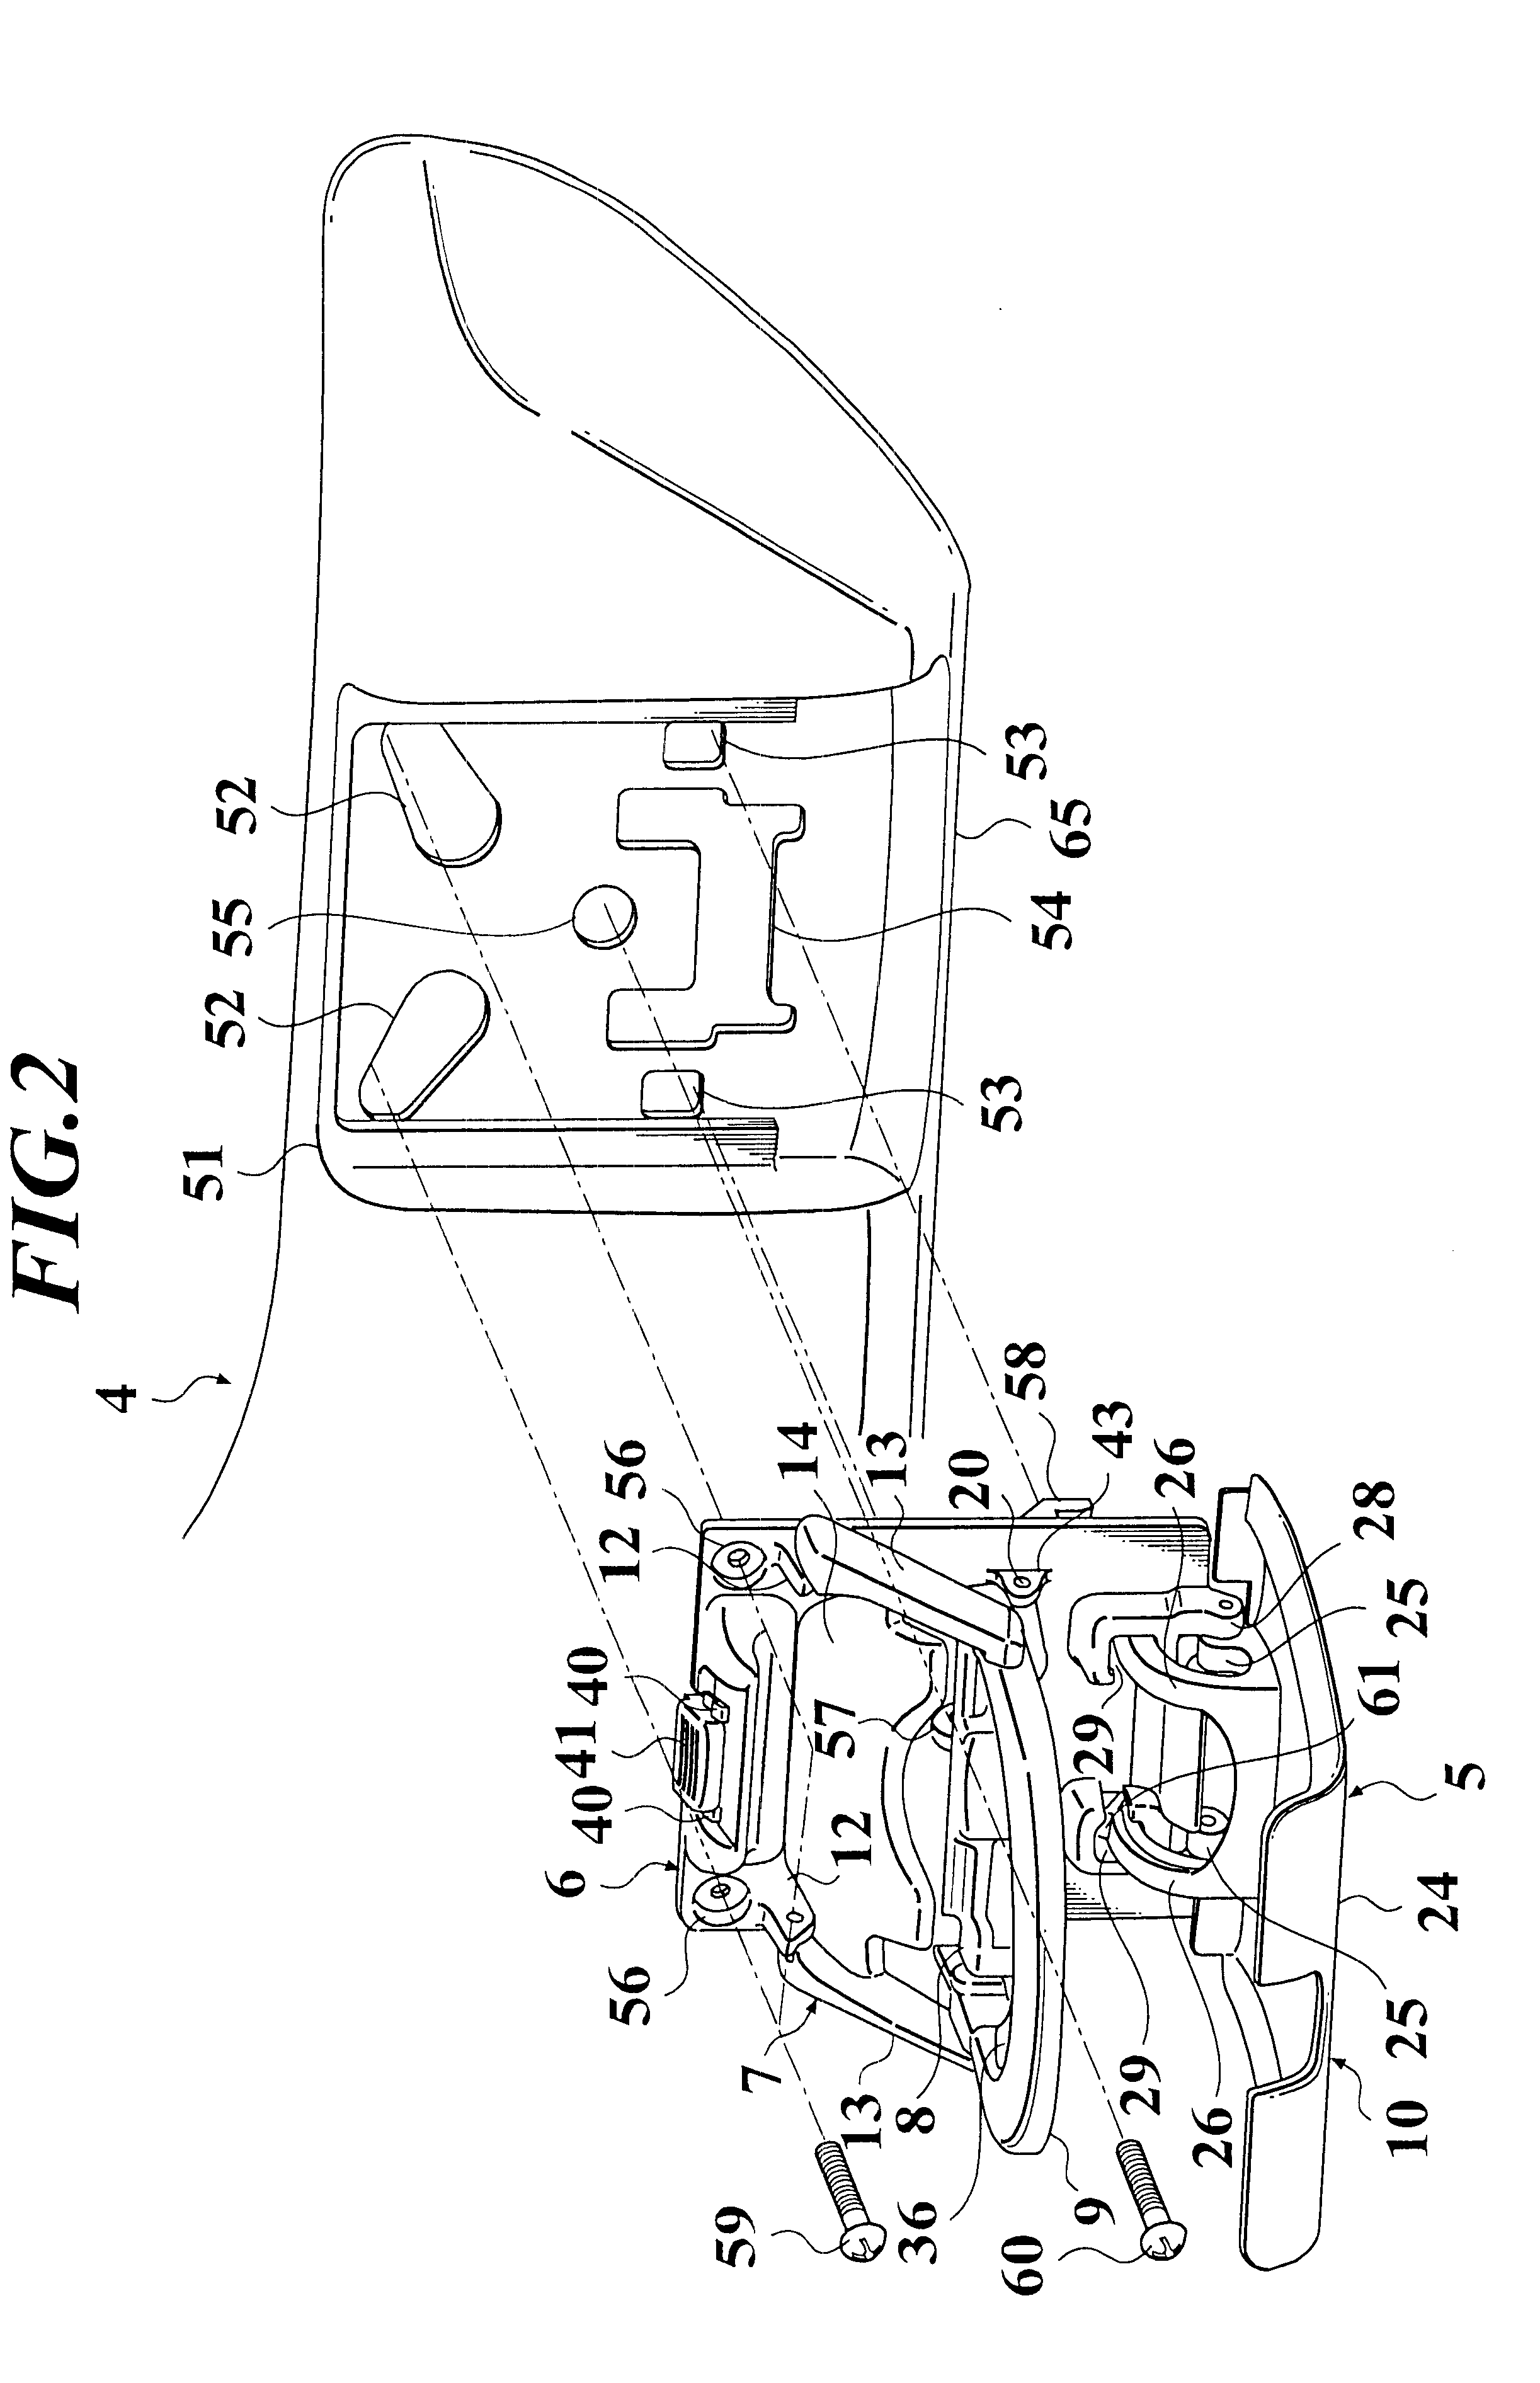 Vehicle seat having container holder